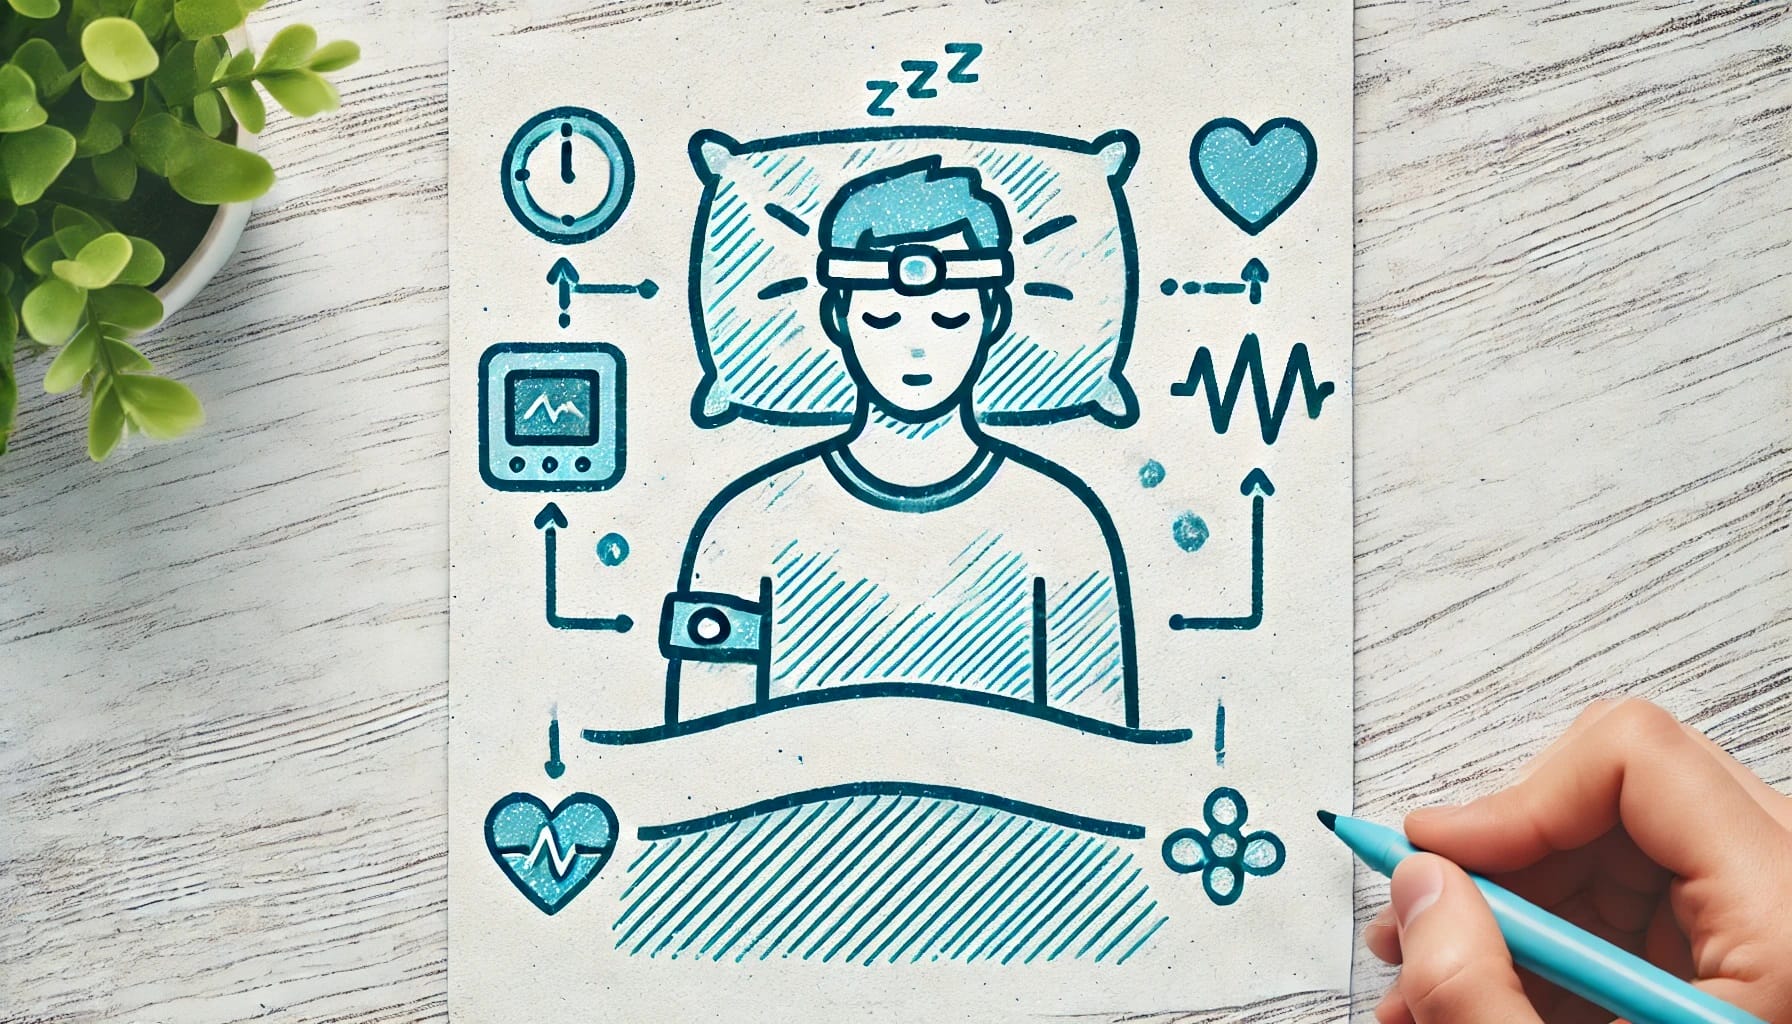 Illustration of a person sleeping in bed with various wearable monitors, including a heart rate monitor, blood pressure cuff, and brain activity monitor, highlighting ongoing research into sleep breathing disorders.